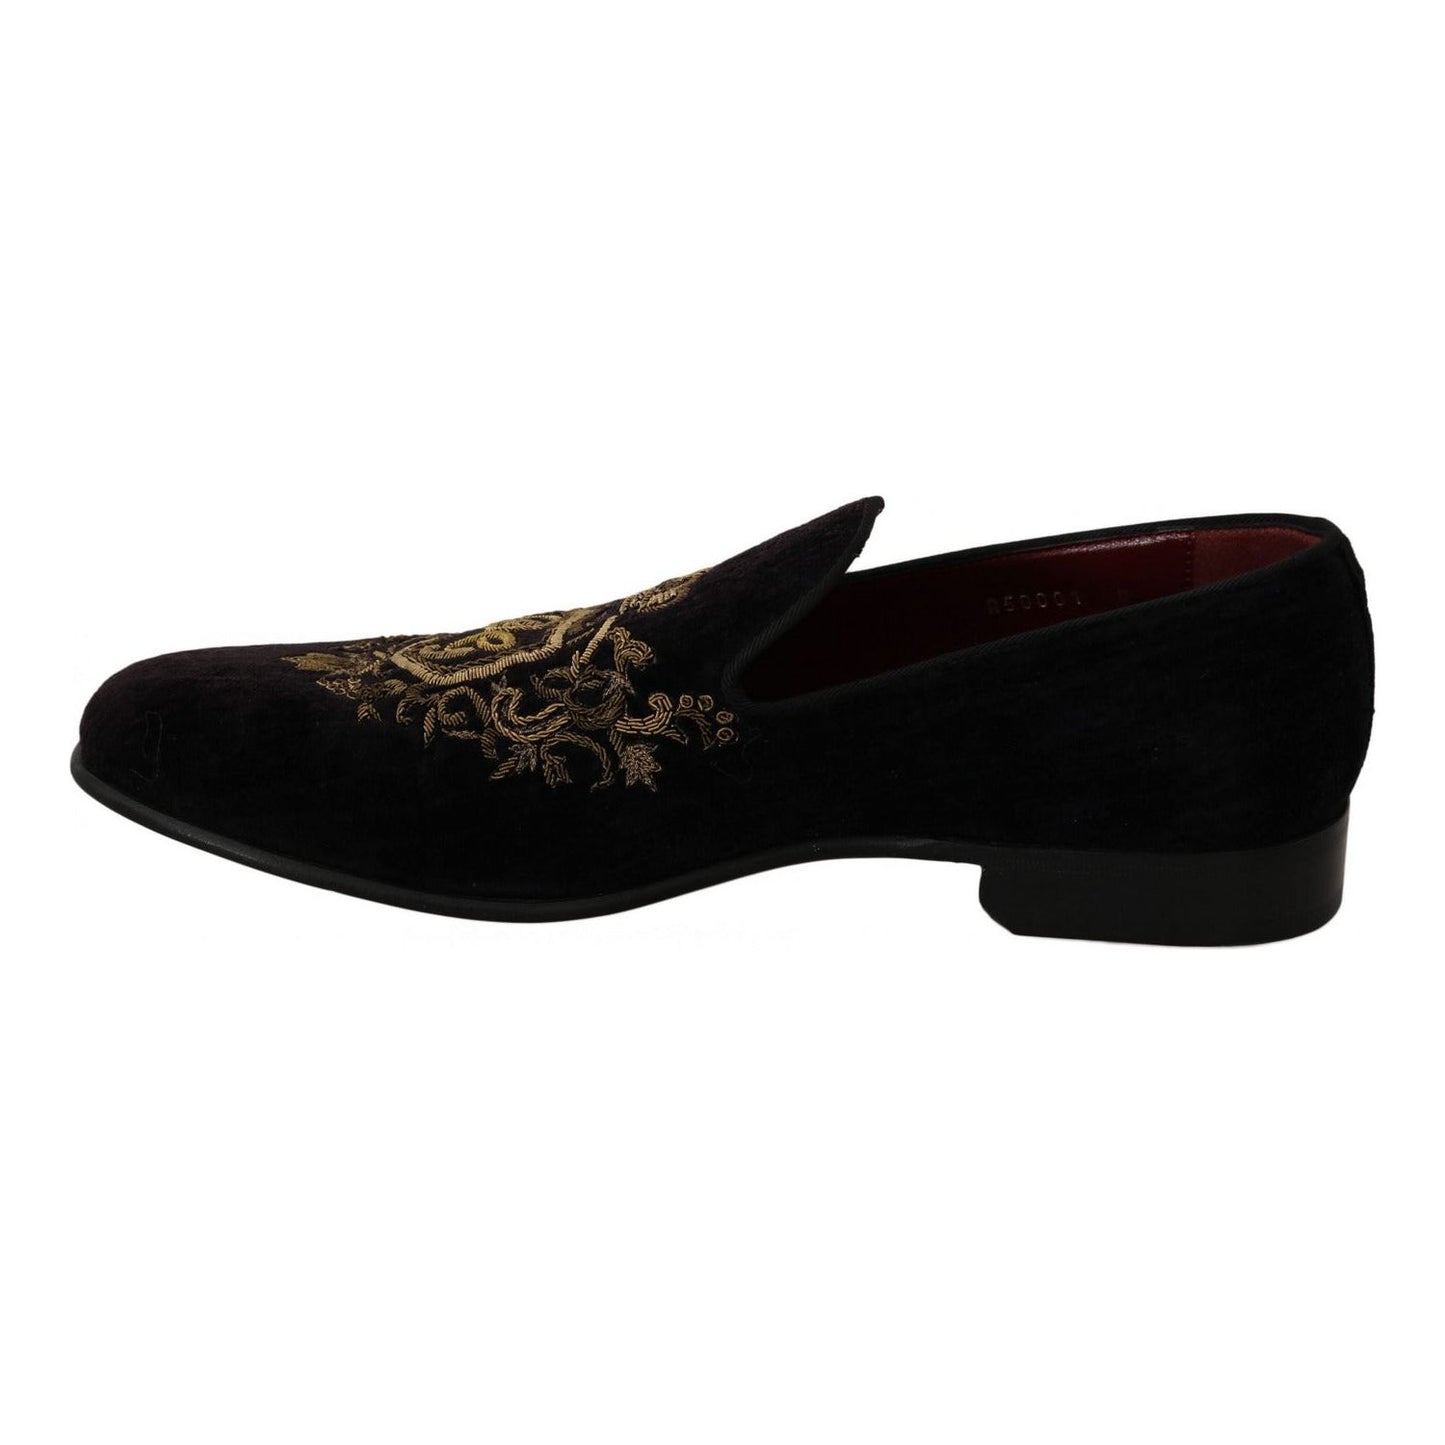 Elegant Black Loafers with Gold Crown Embroidery Dolce & Gabbana